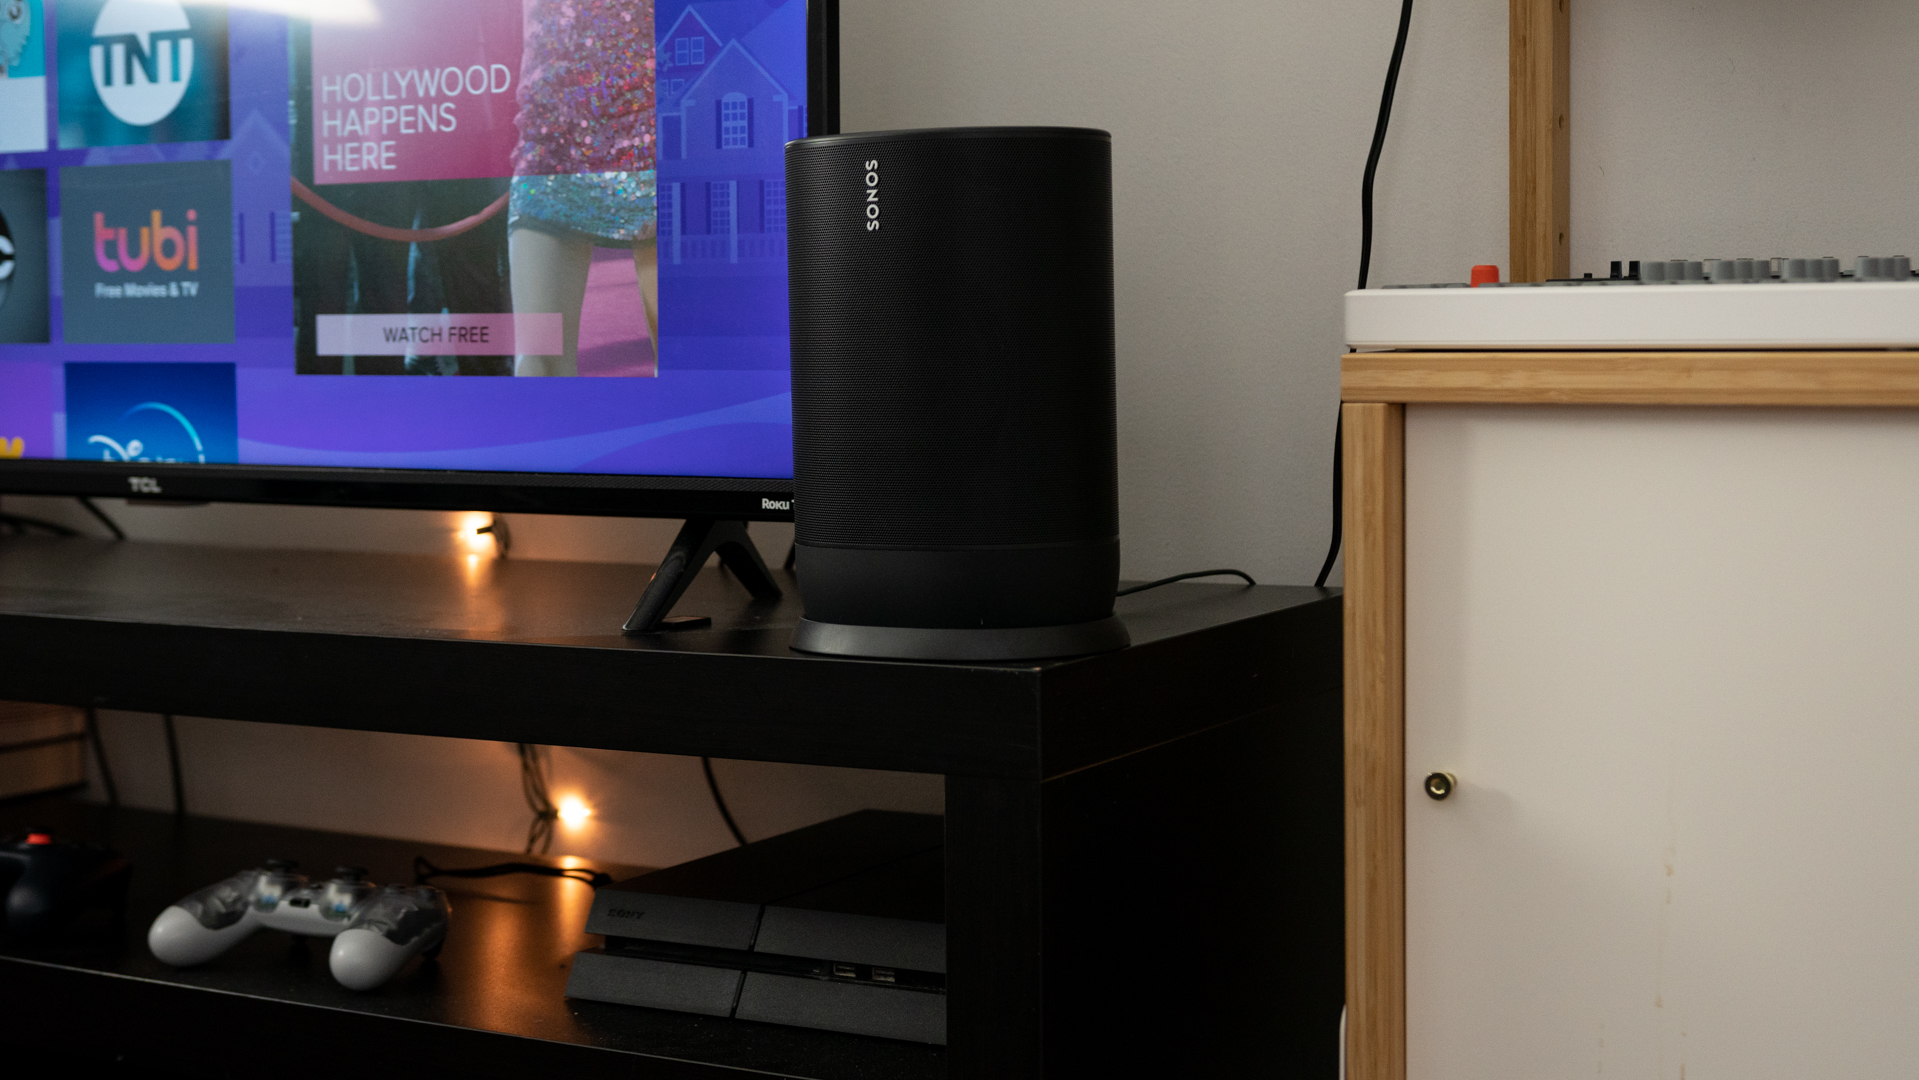 The Sonos Move speaker on a TV stand next to a Roku TV and a playstation controller